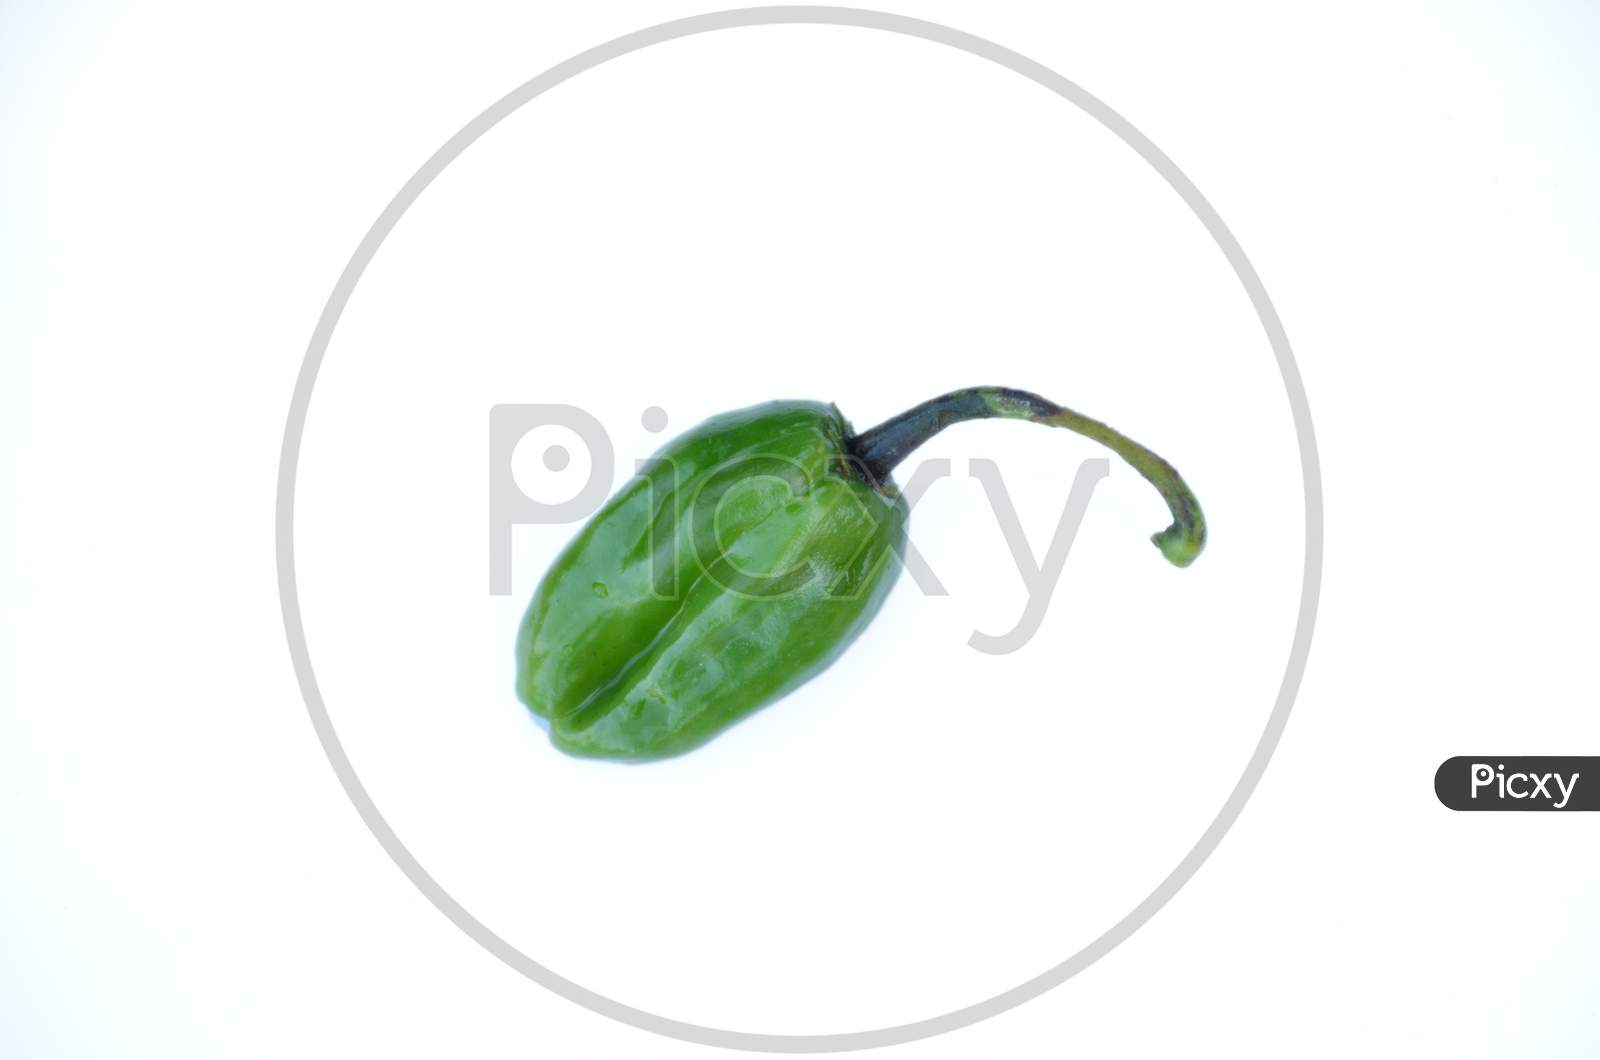 The Green Ripe Chilly Isolated On White Background.